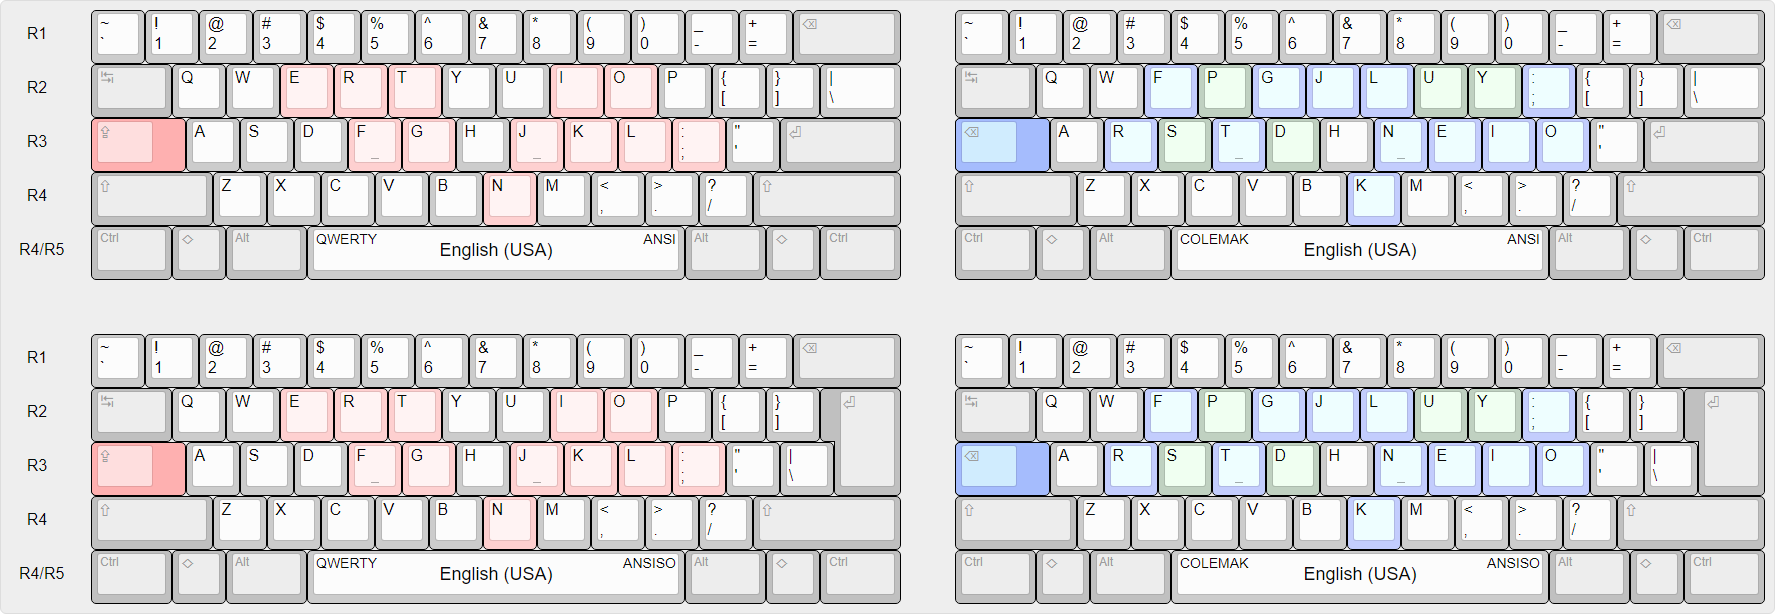 A Visual Comparison of Different National Layouts on a Computer